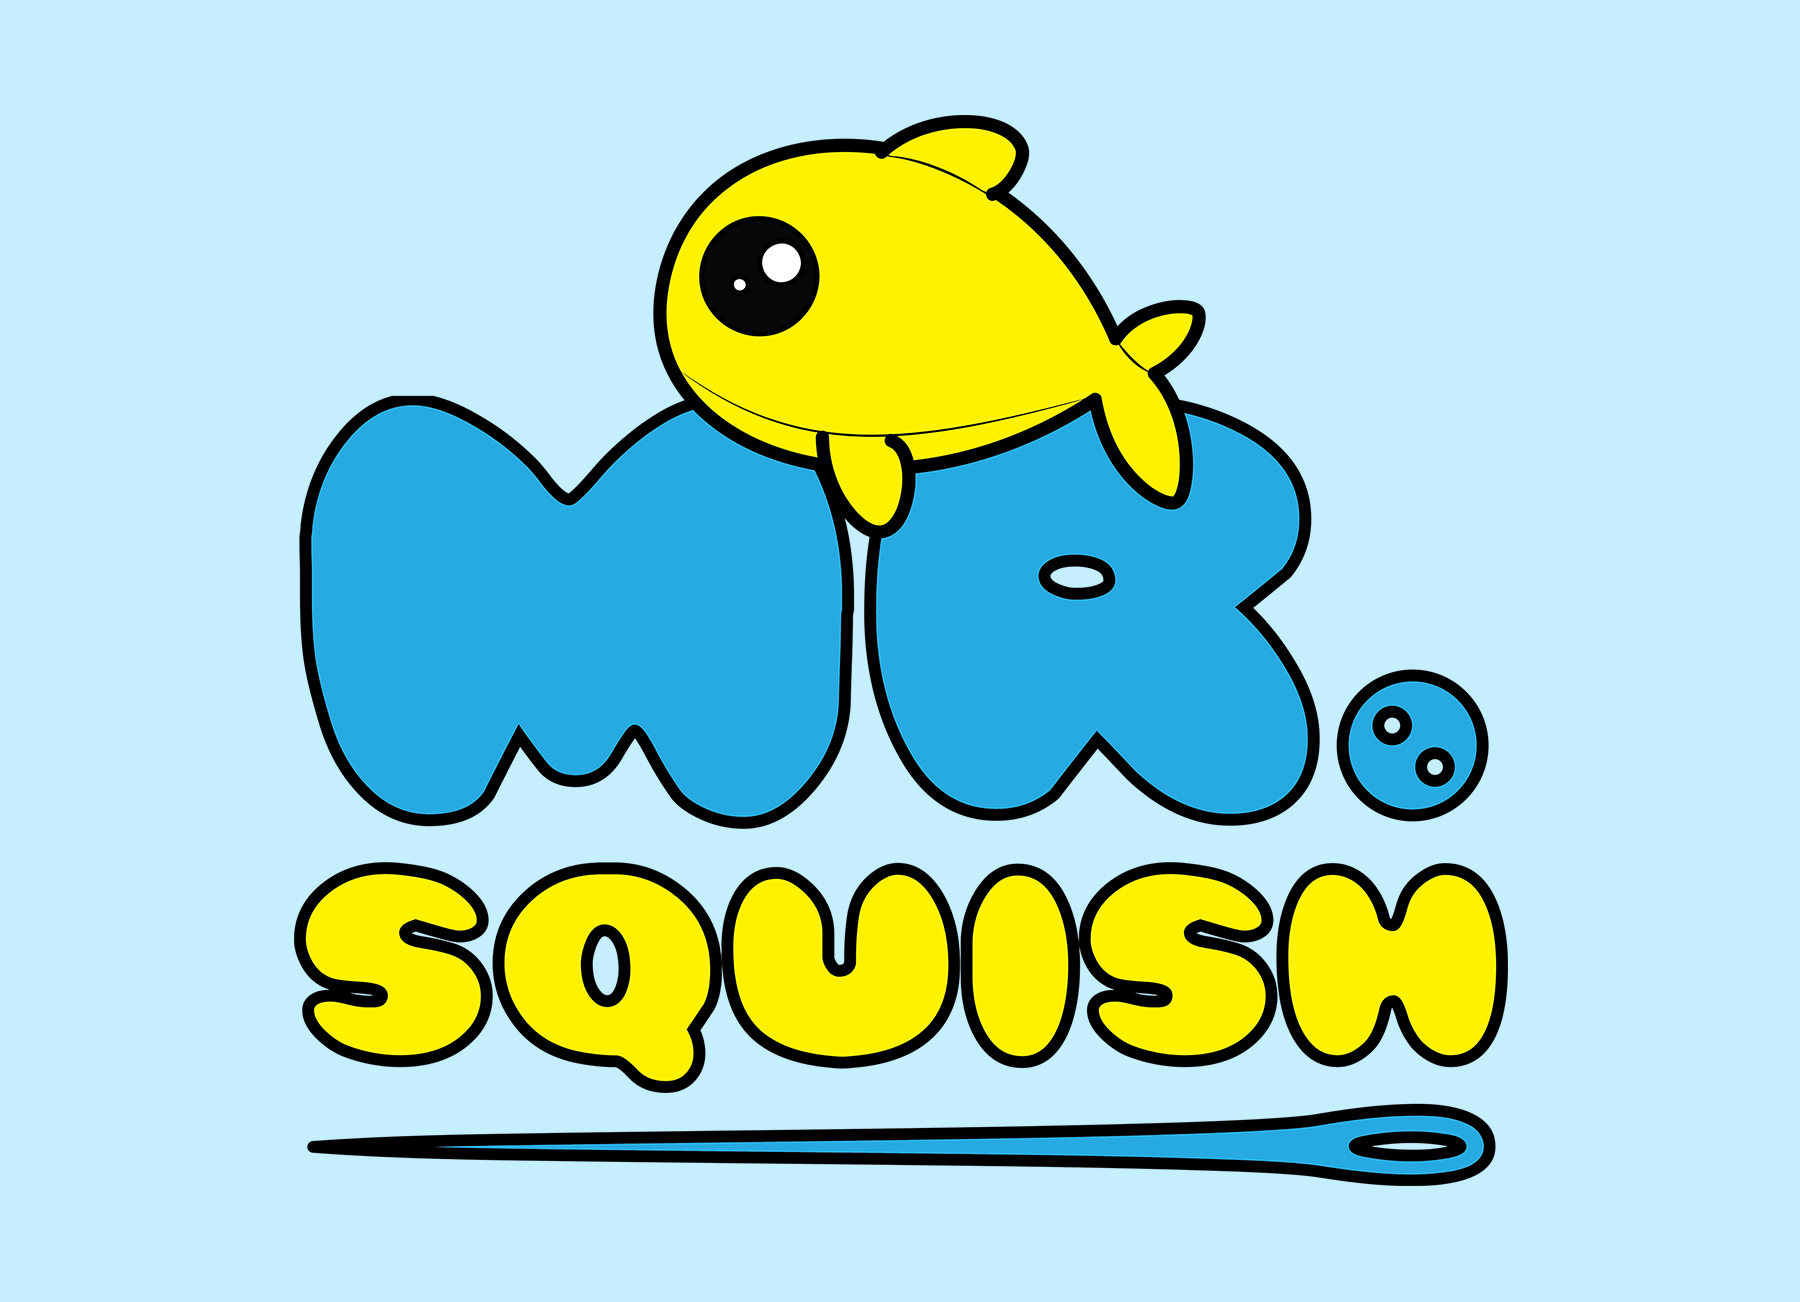 Mr. Squish logo written in bubble letters with a cute plush fish